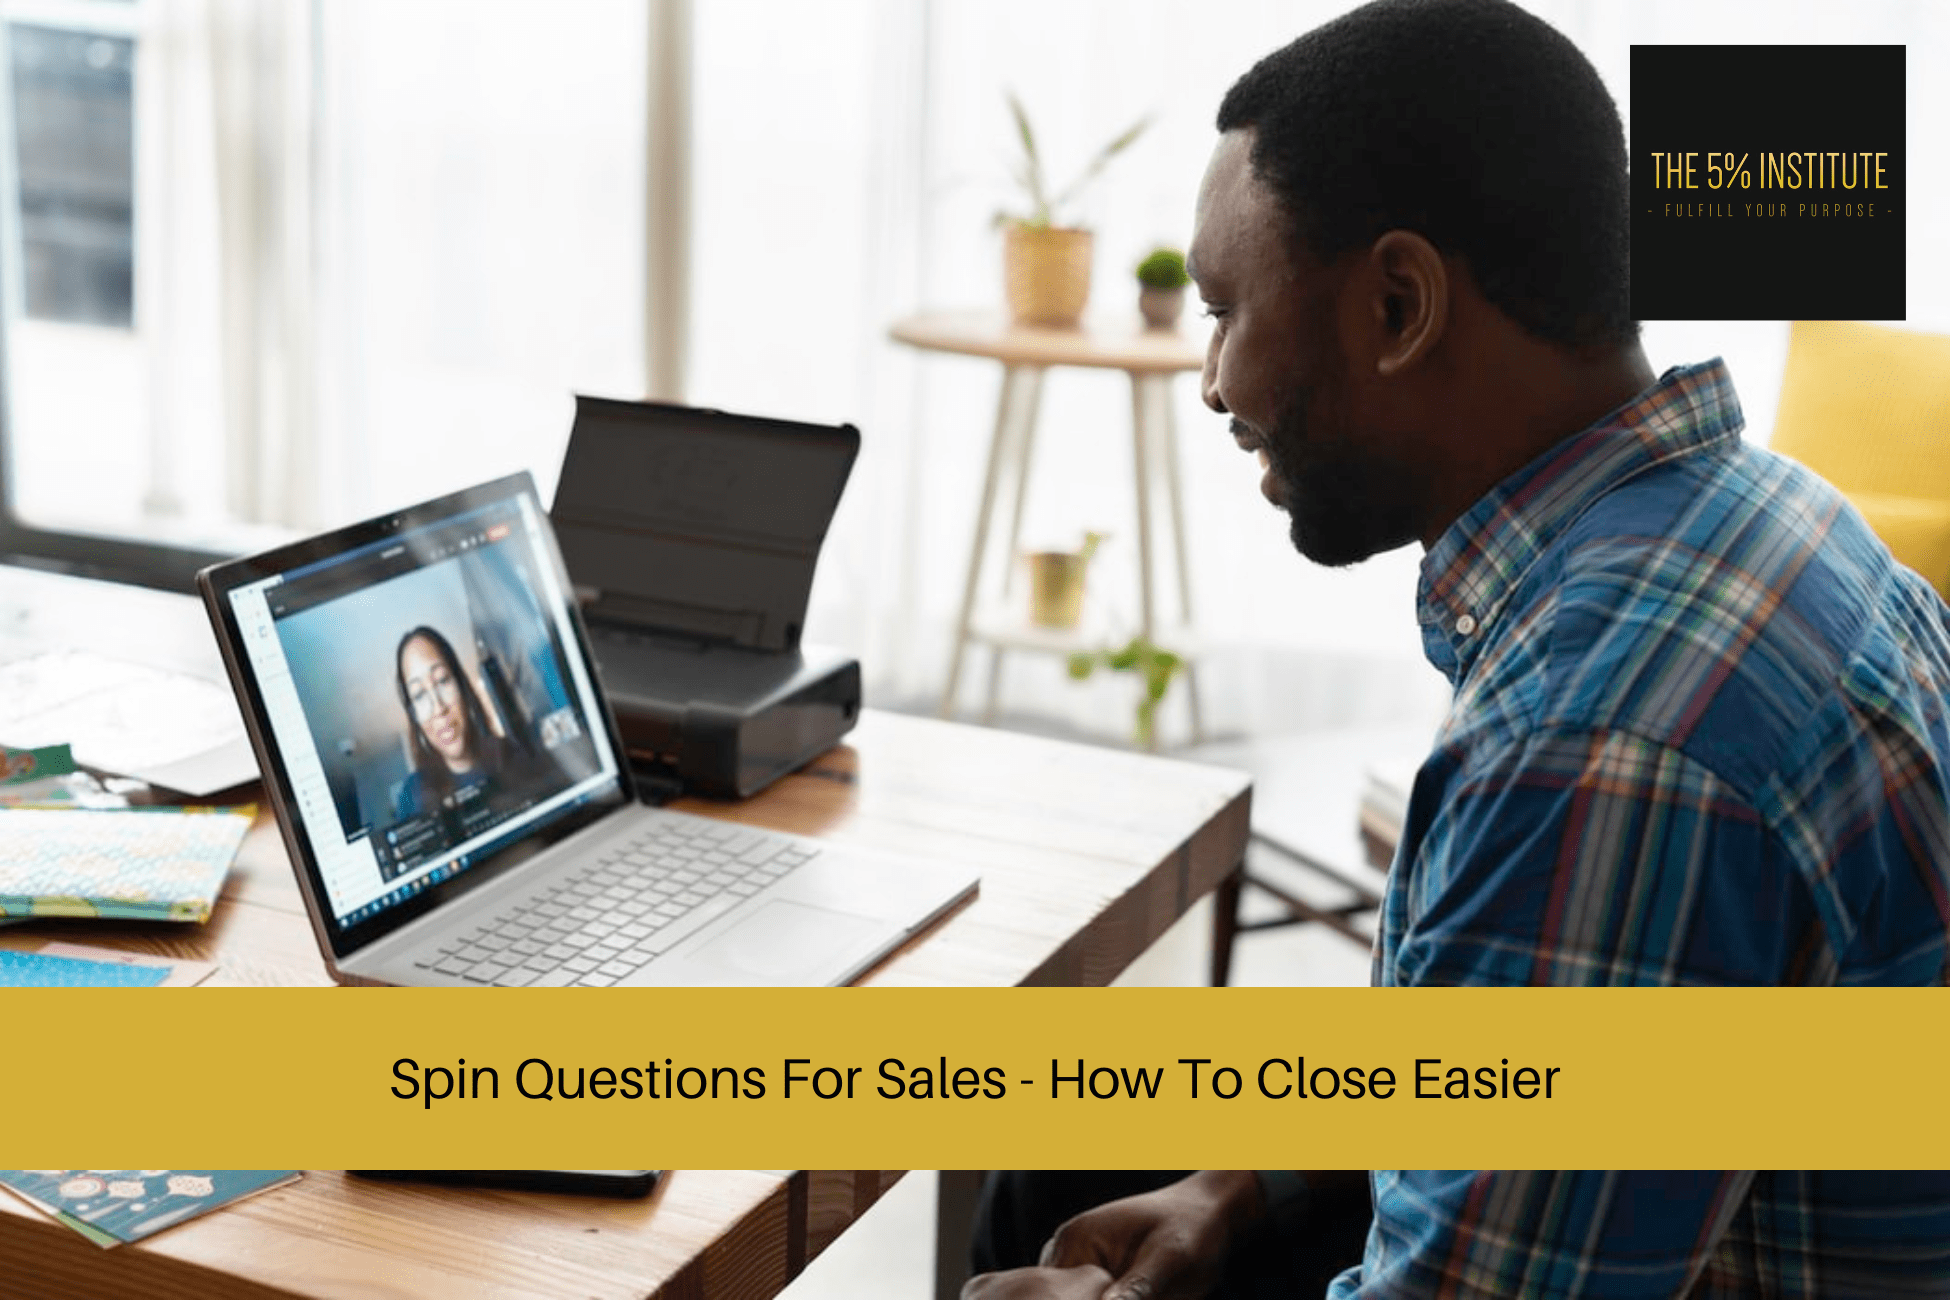 Spin Questions For Sales - How To Close Easier